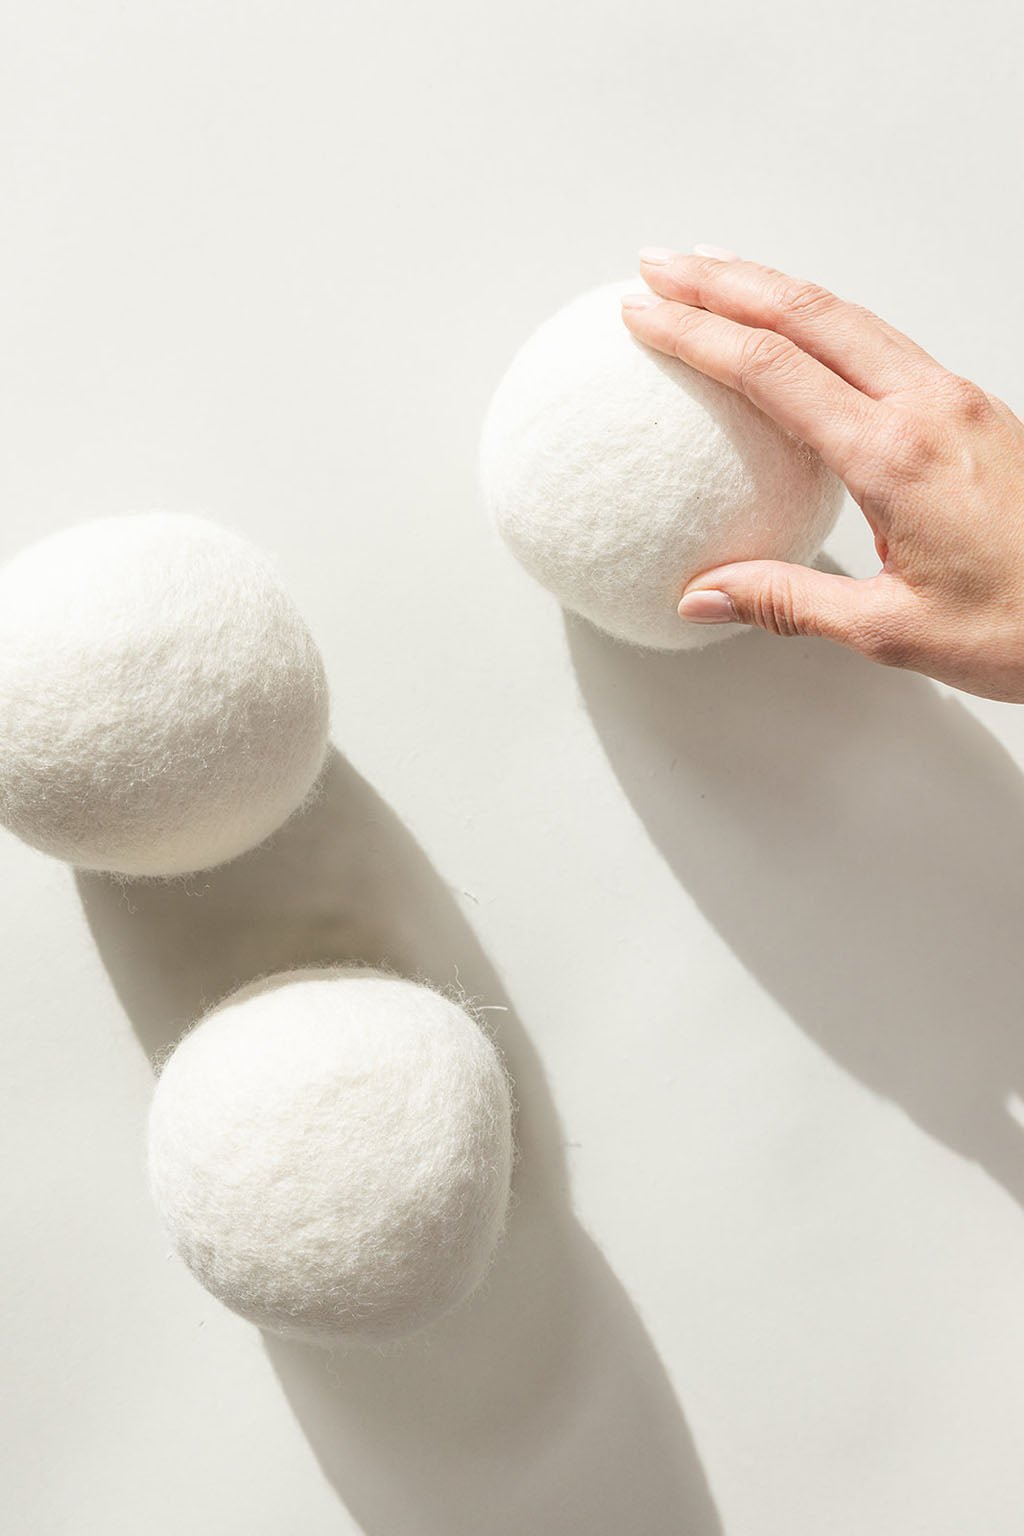 Wool Dryer Balls resting on a white background. A hand is feeling one of the wool balls.